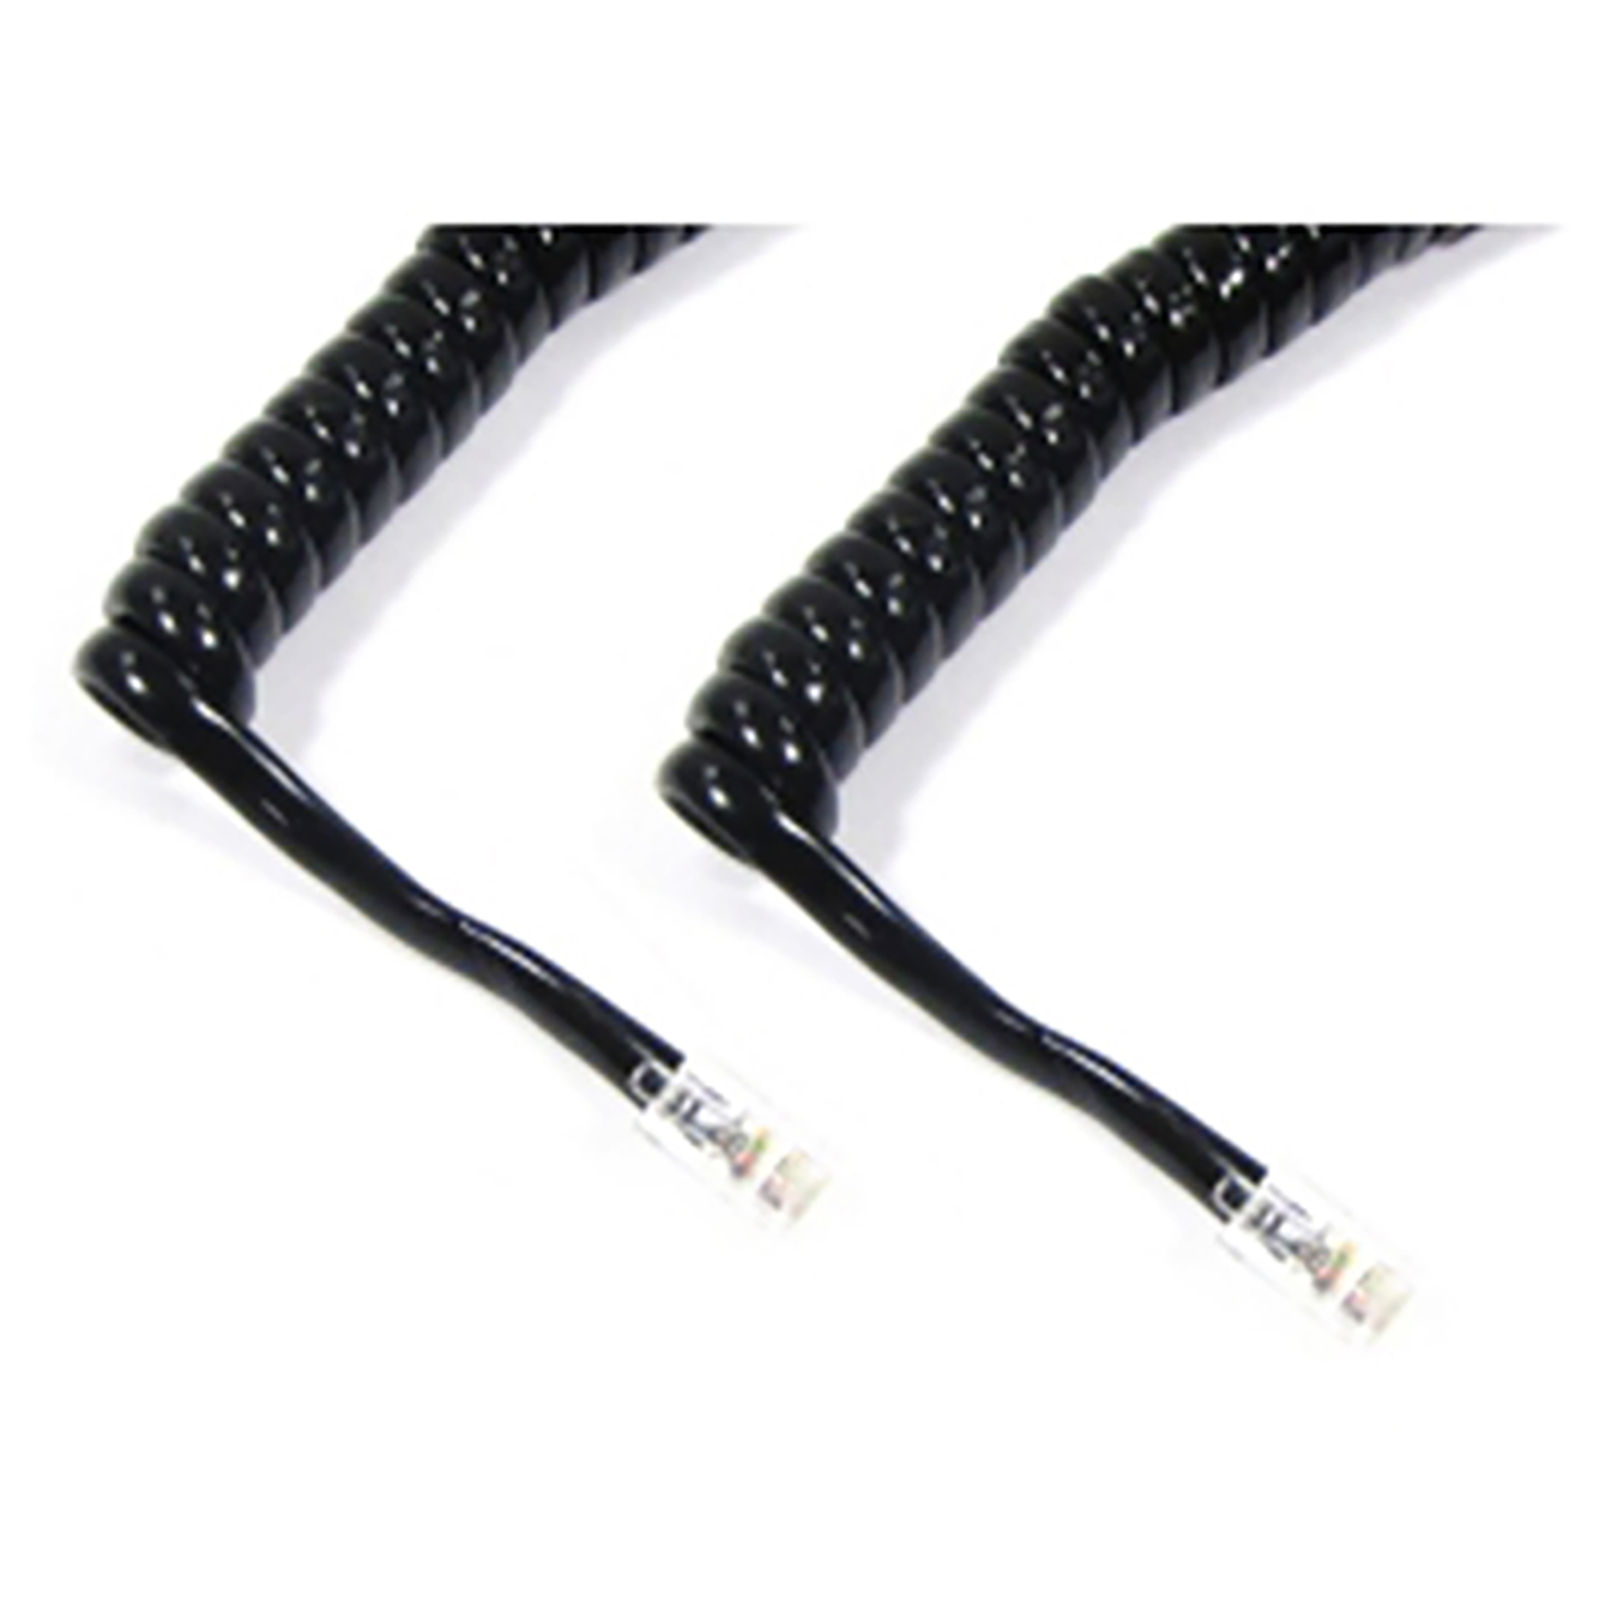 4-Wire Telephone Cable RJ11 (10m) - Cablematic